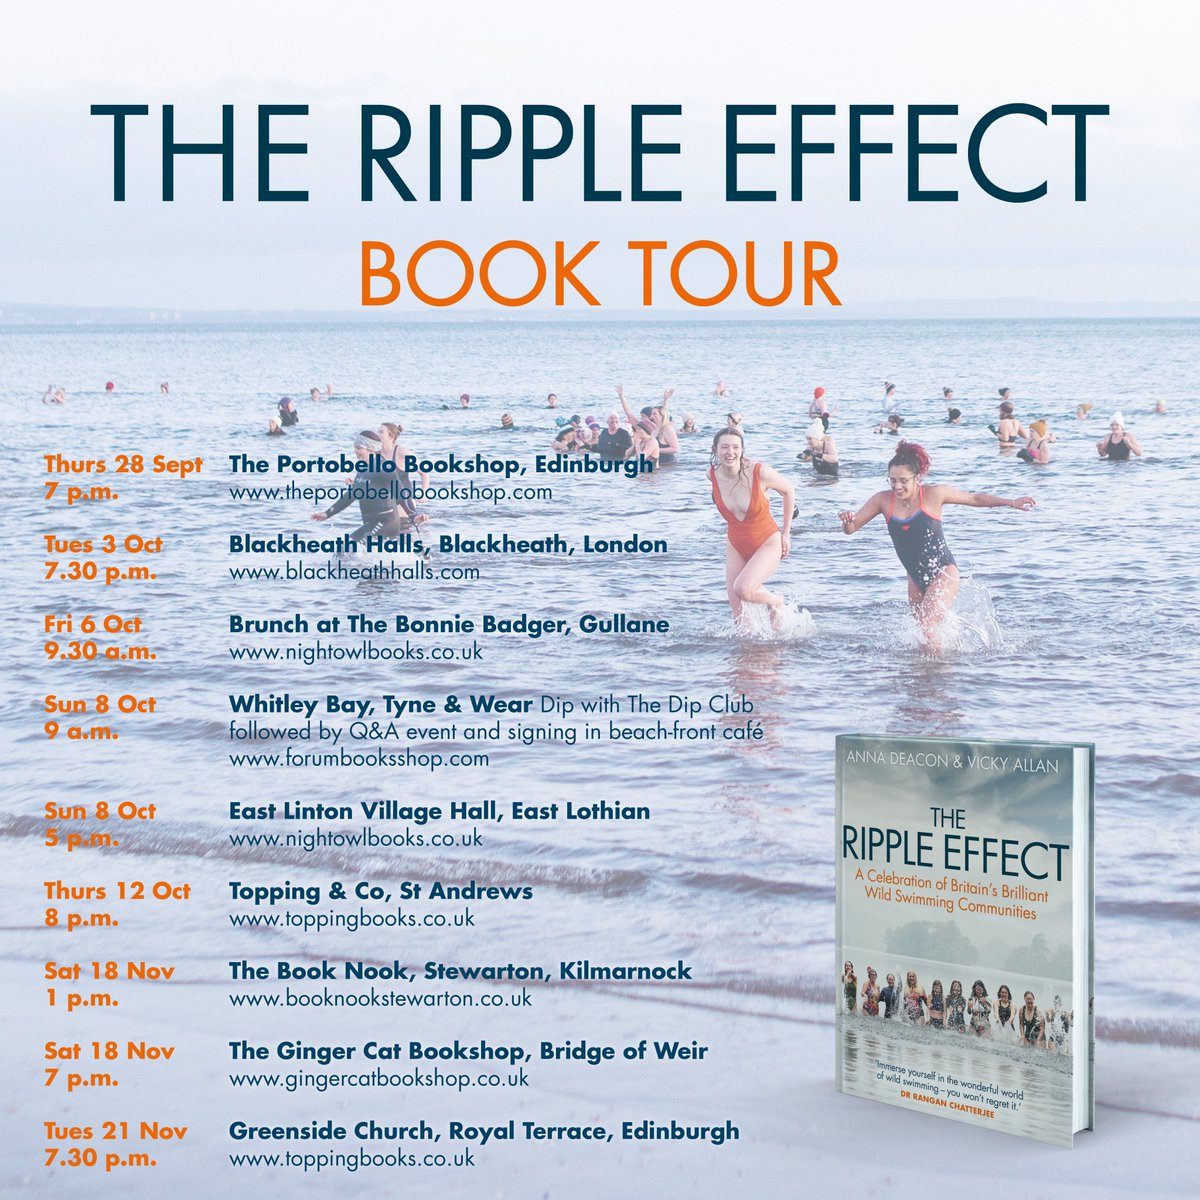 The Ripple Effect is on tour! Don't worry if you missed their event at Portobello, @AnnaDeacon and @vicky_allan are going to be in plenty more places! You can find out more and where to book through our events calendar here: shorturl.at/lzPT8